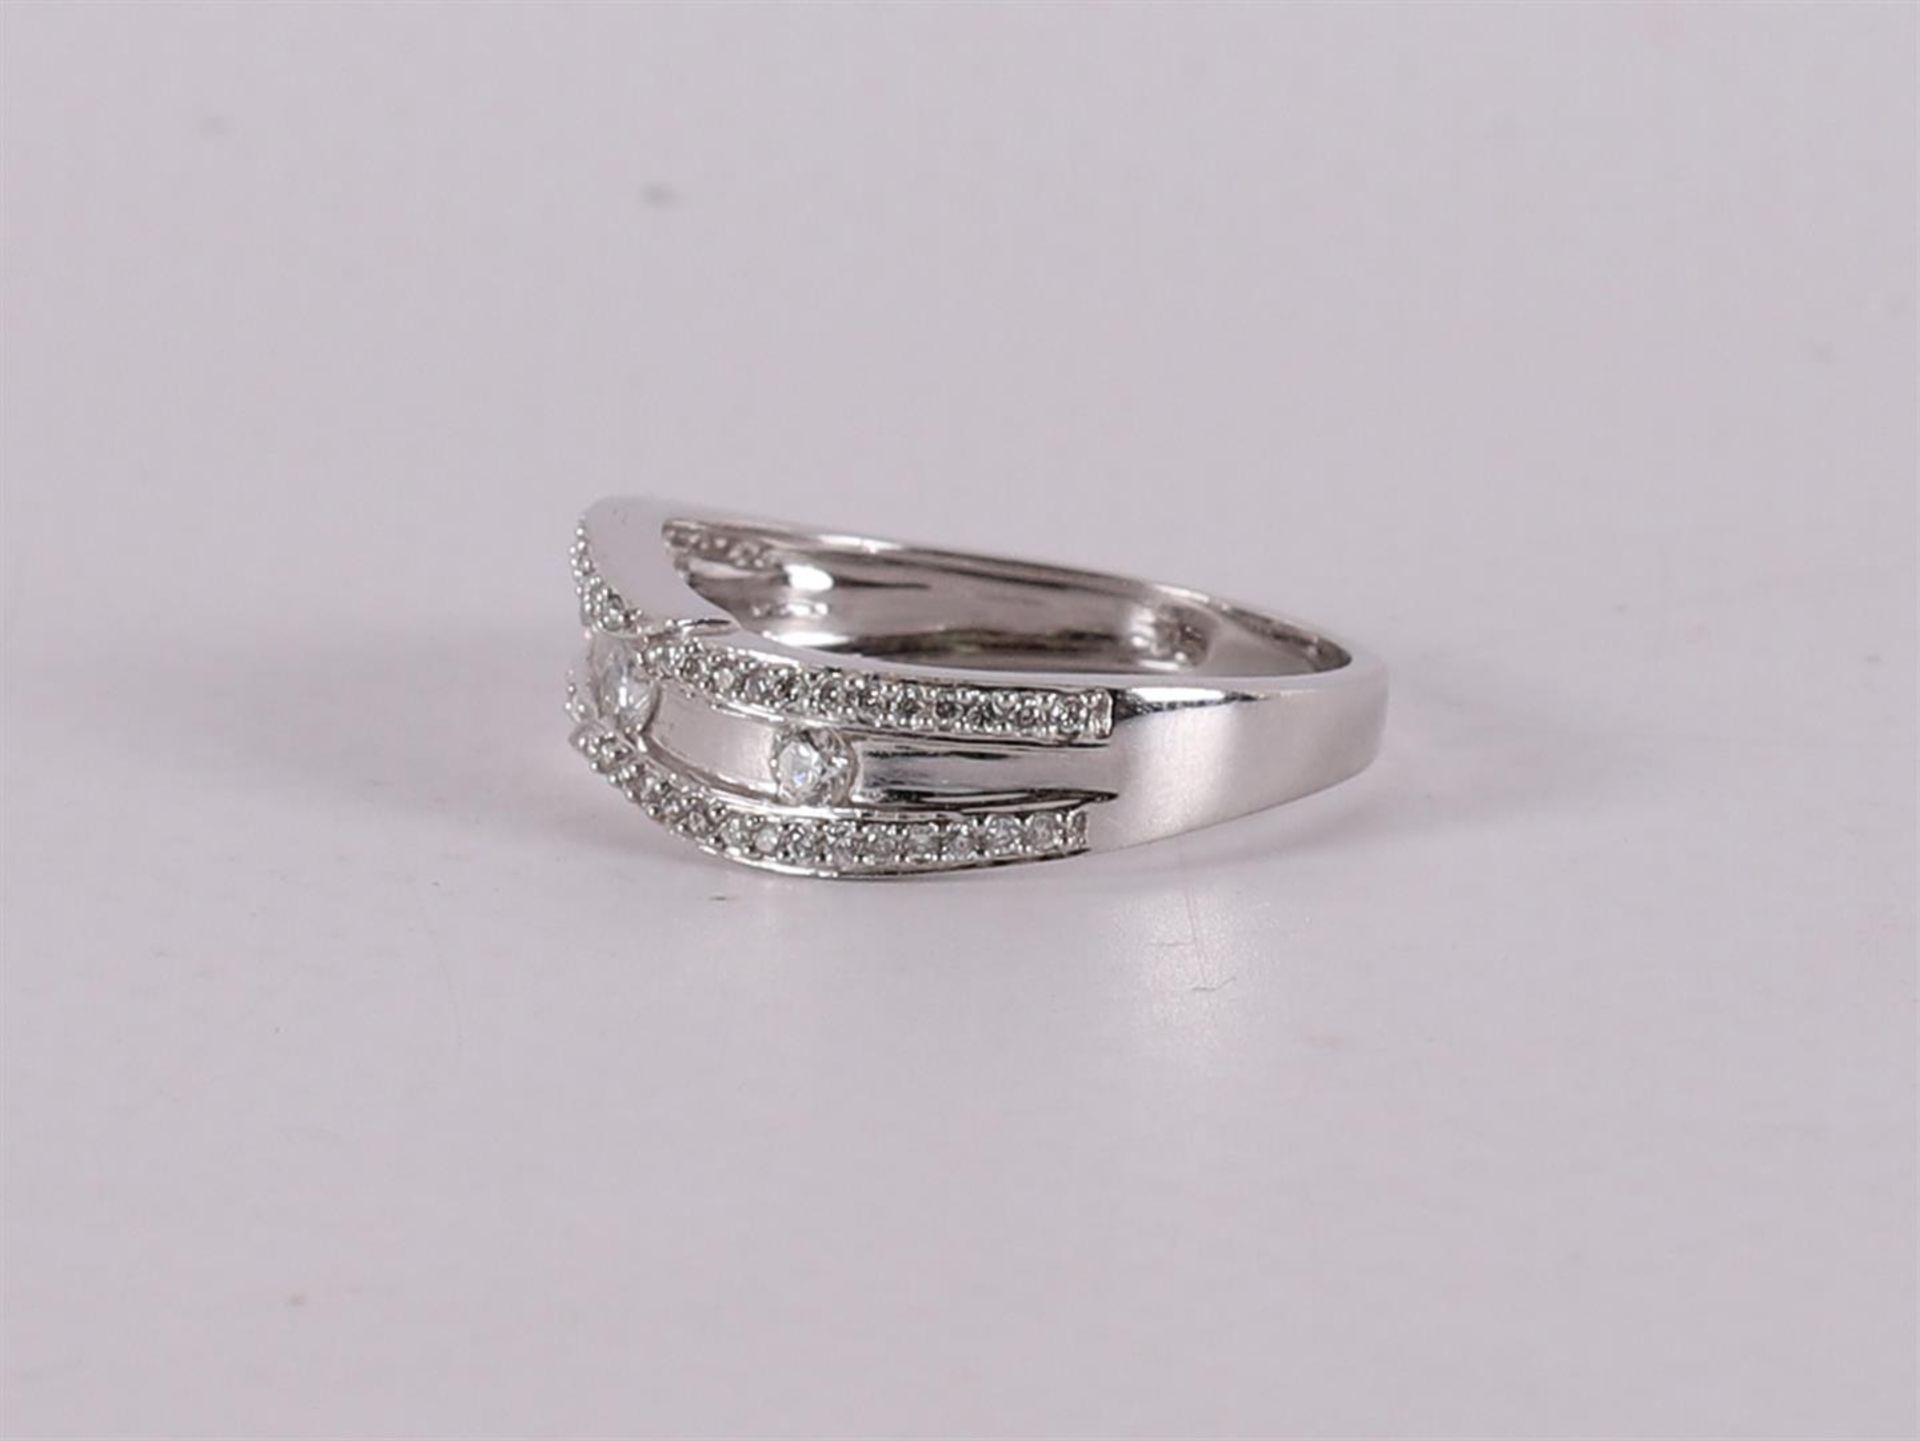 An 18 kt white gold band ring with 3 brilliants and 54 smaller ones. - Image 2 of 2